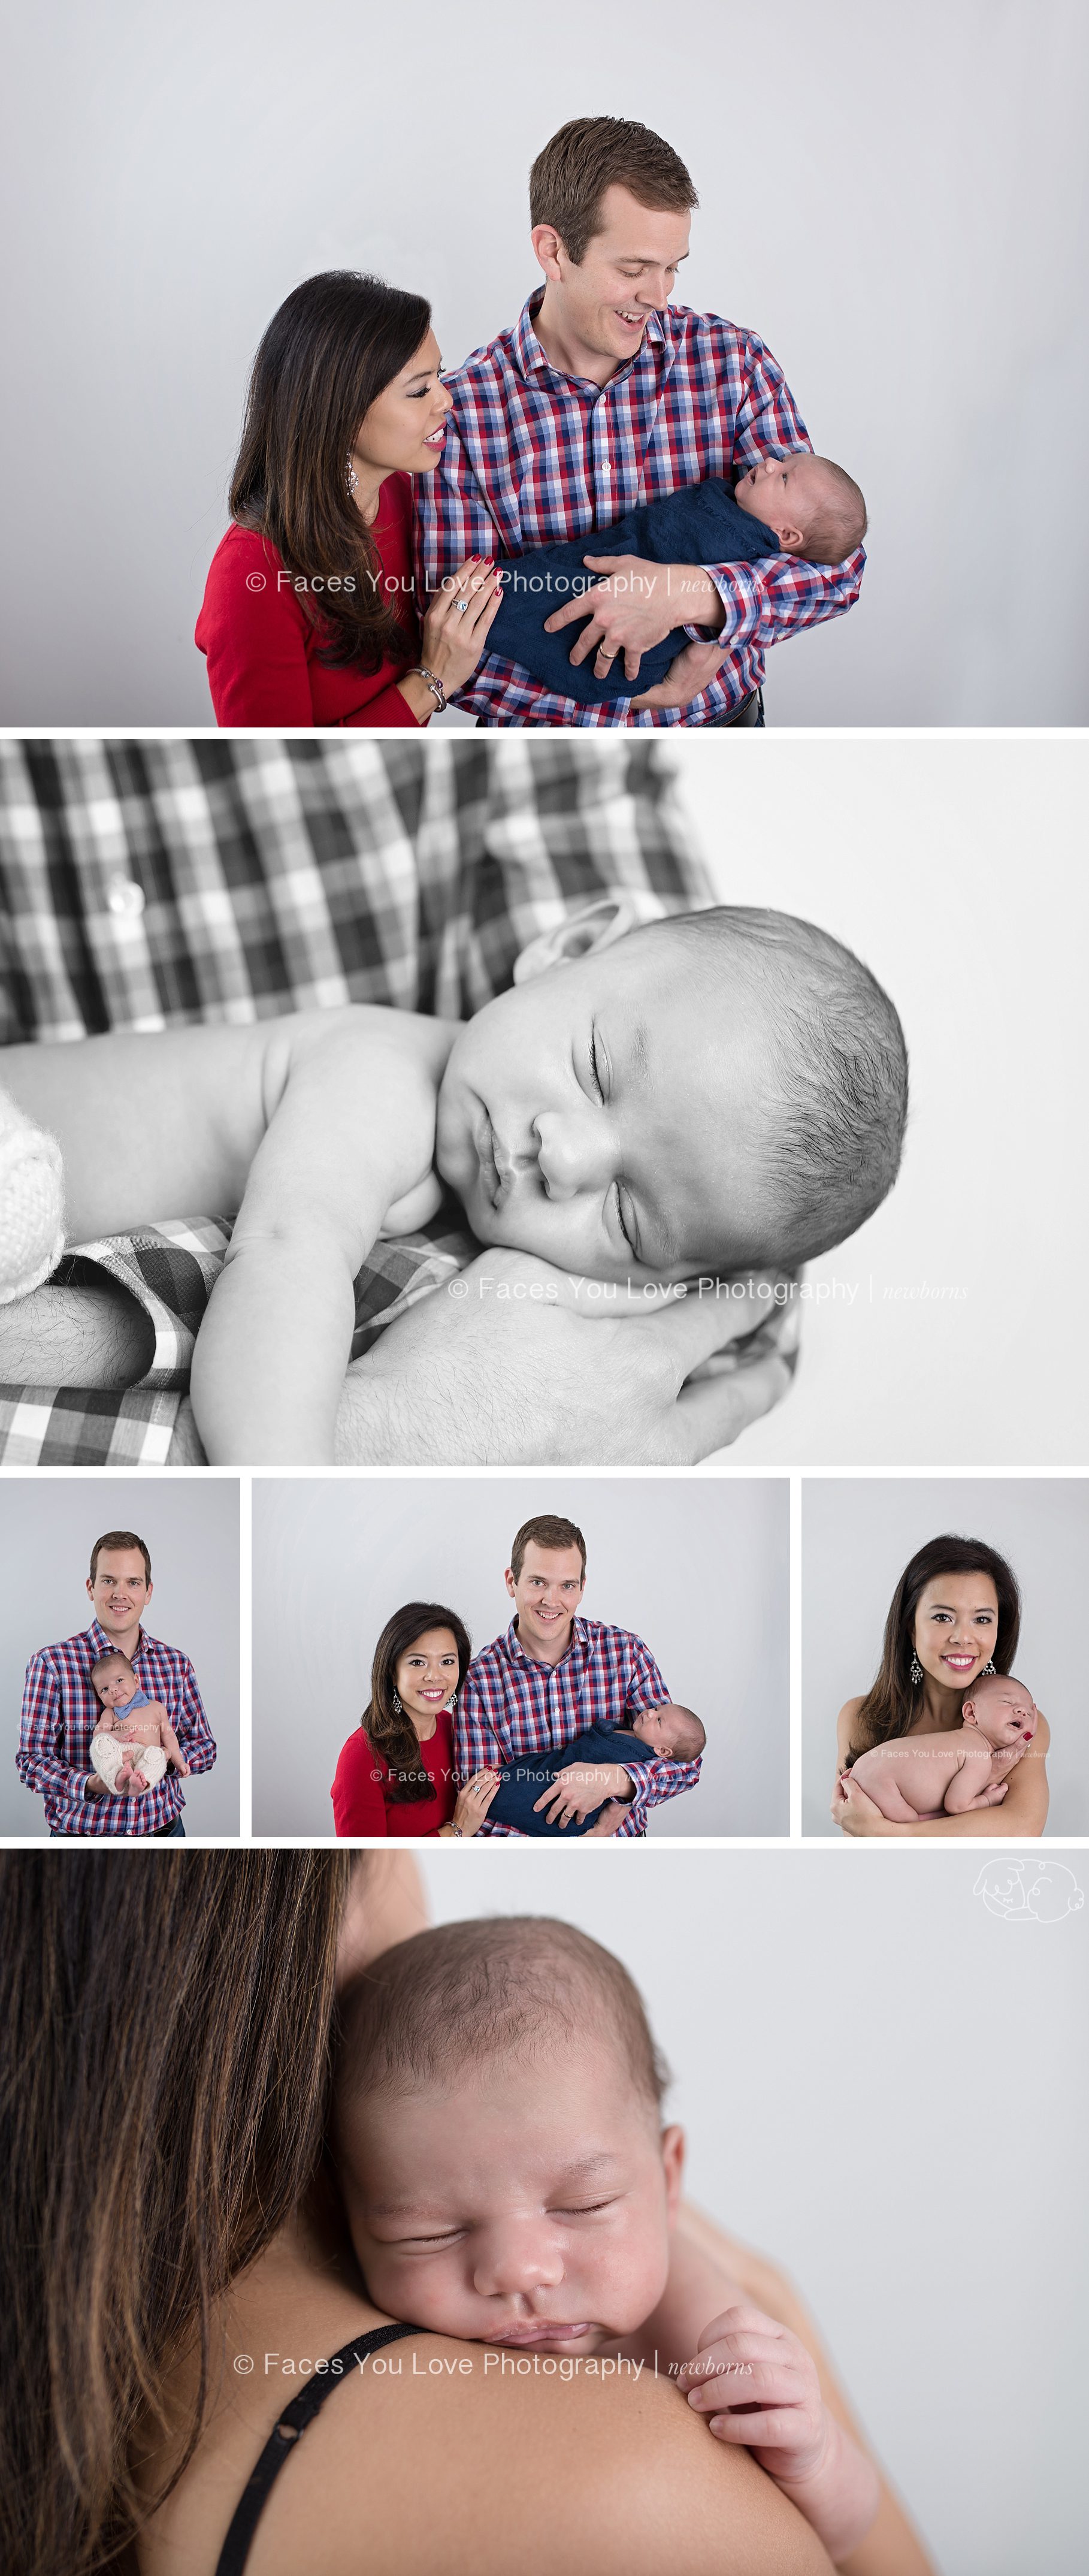 Adoption Session with Newborn Photographer in Kansas City | facesyoulove.com